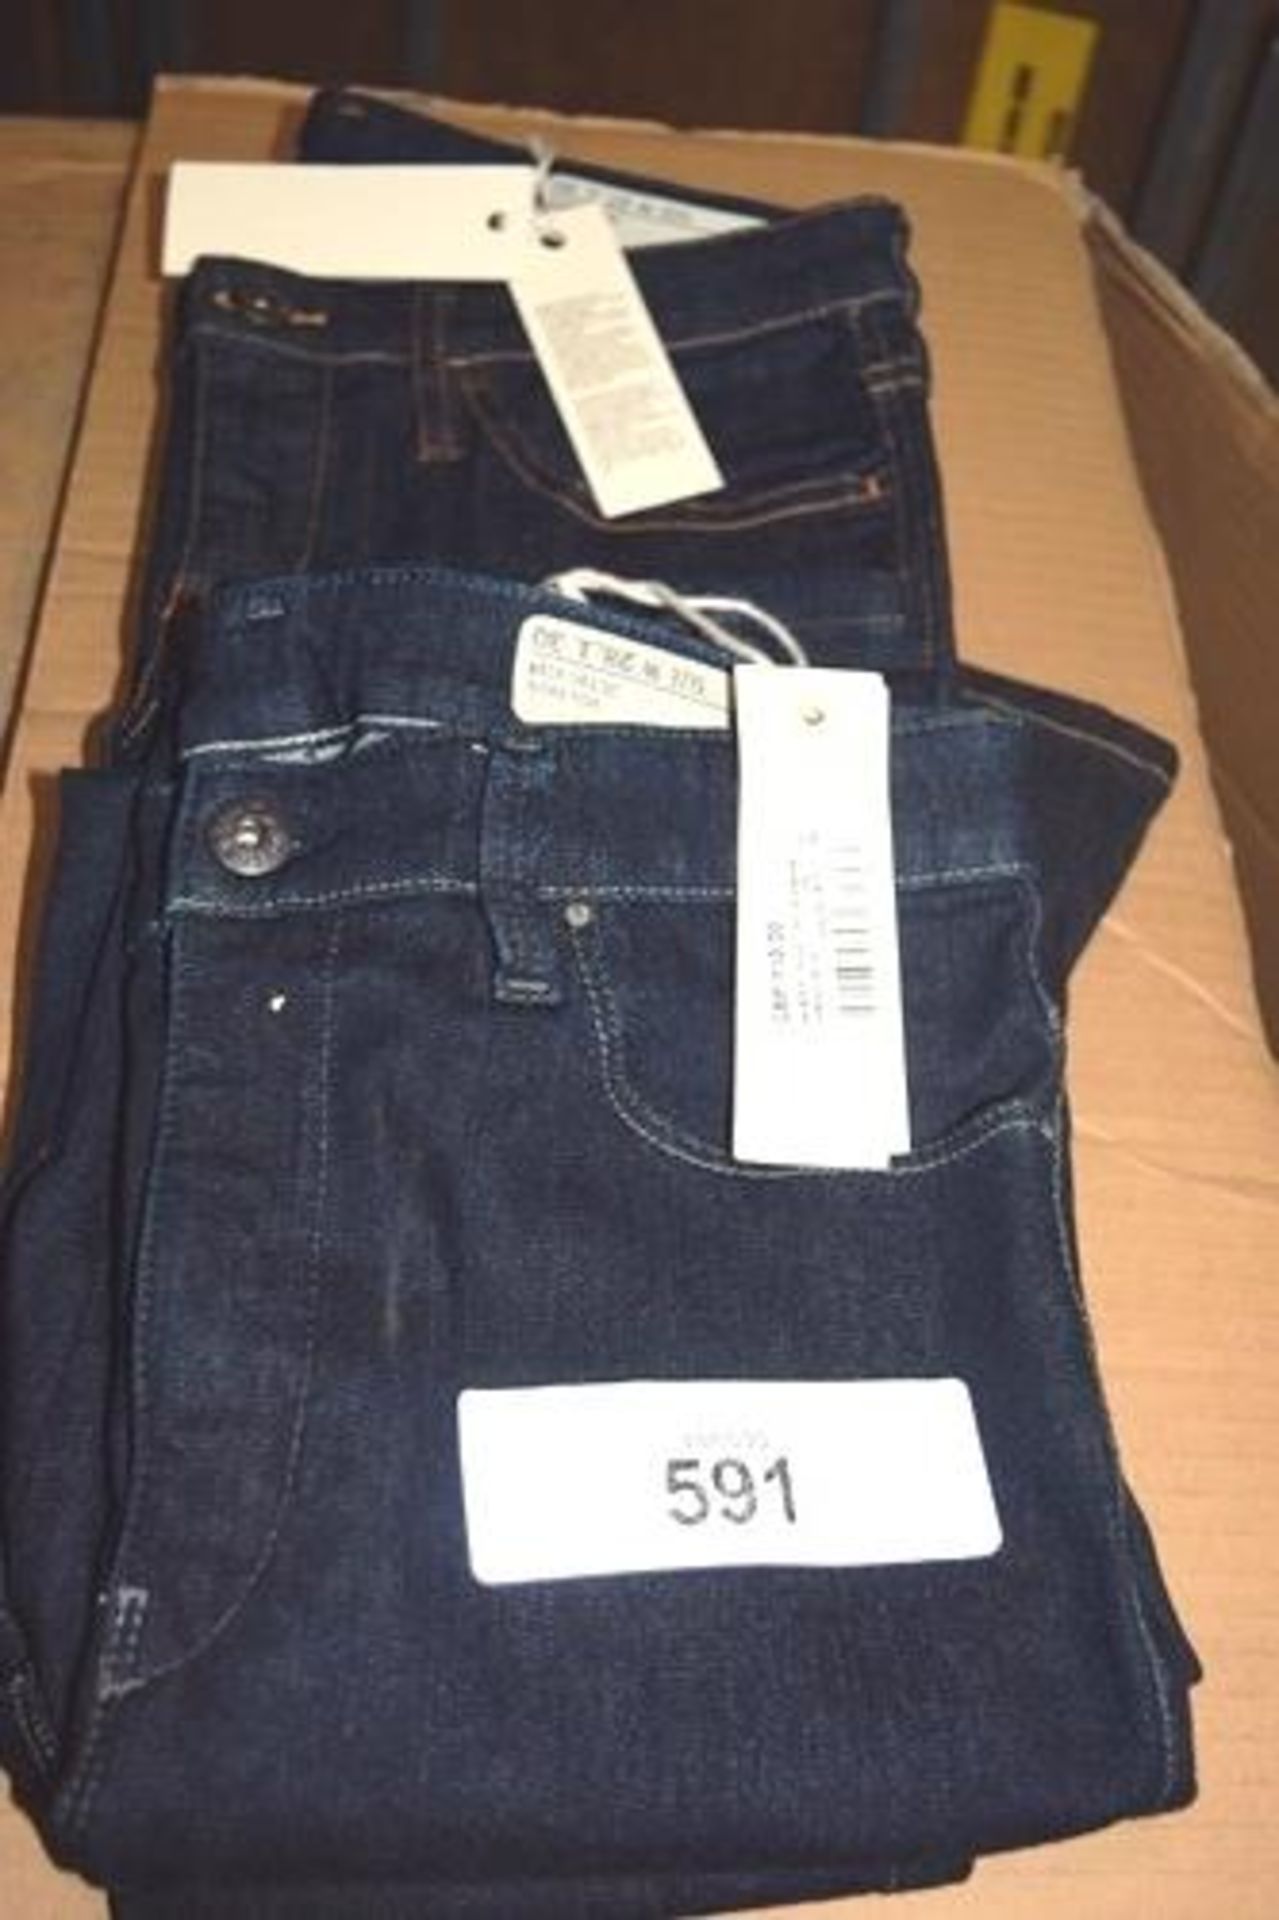 2 x pairs of Diesel jeans comprising 1 x Skinzee-High, size W28/L30 and 1 x Skinzee-Low, size W27/